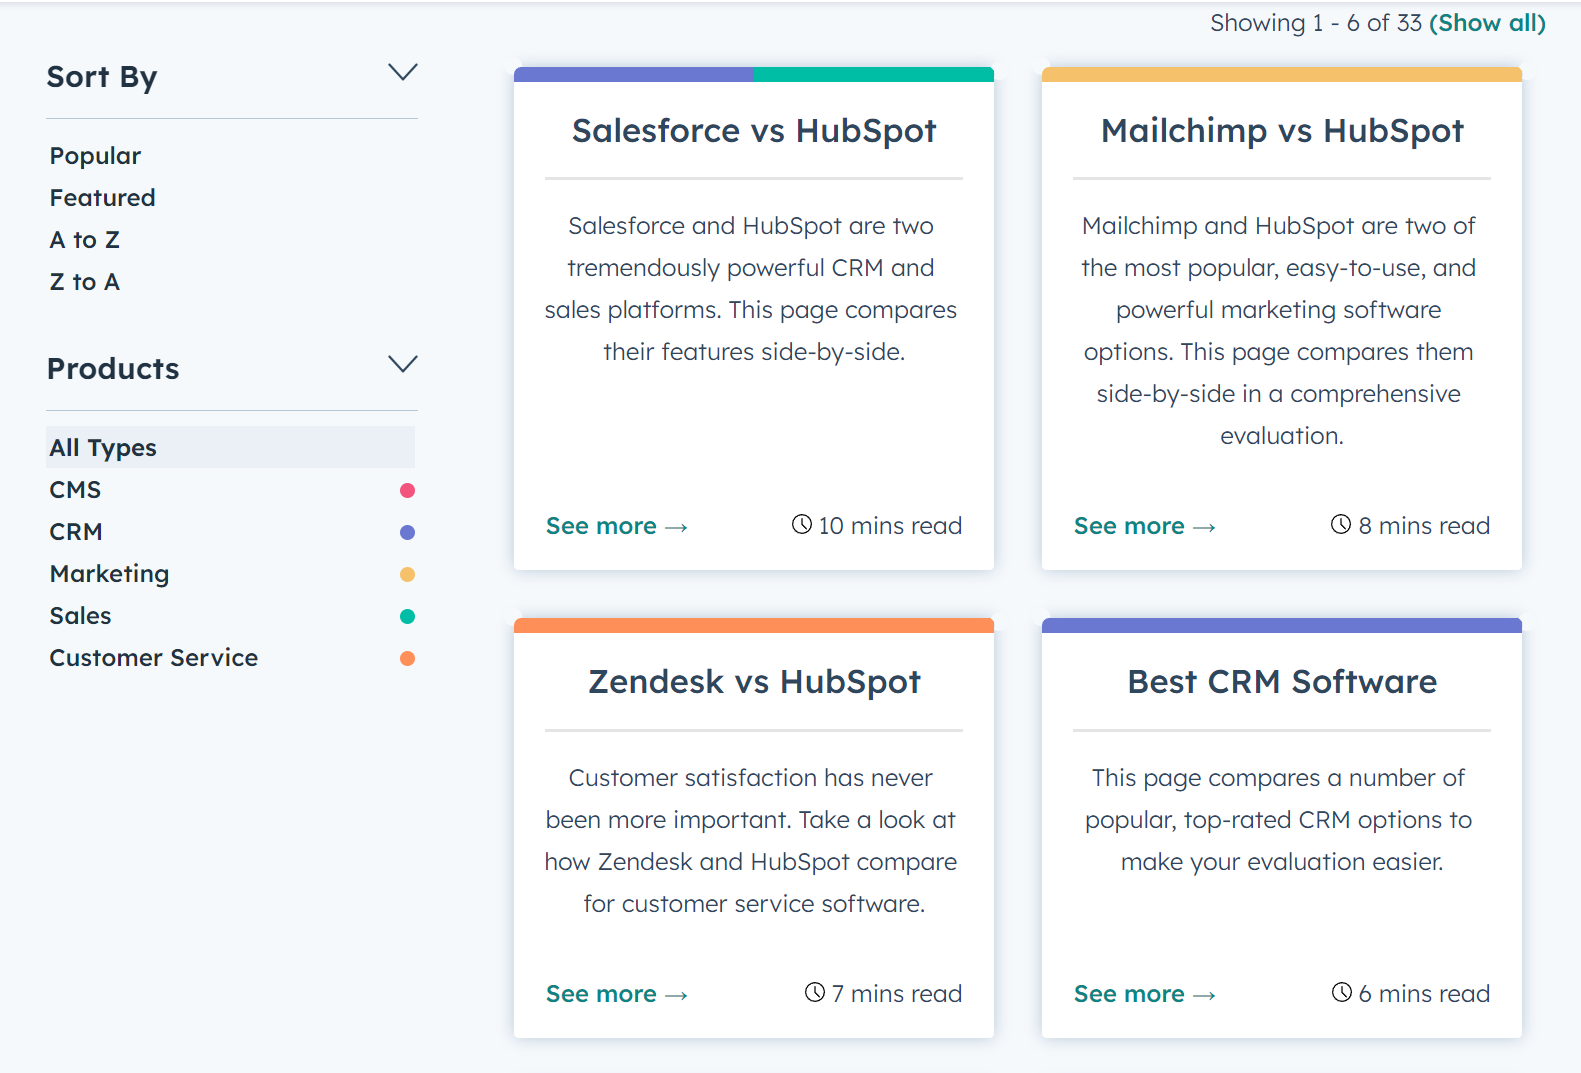 HubSpot has launched more than 33 comparison pages